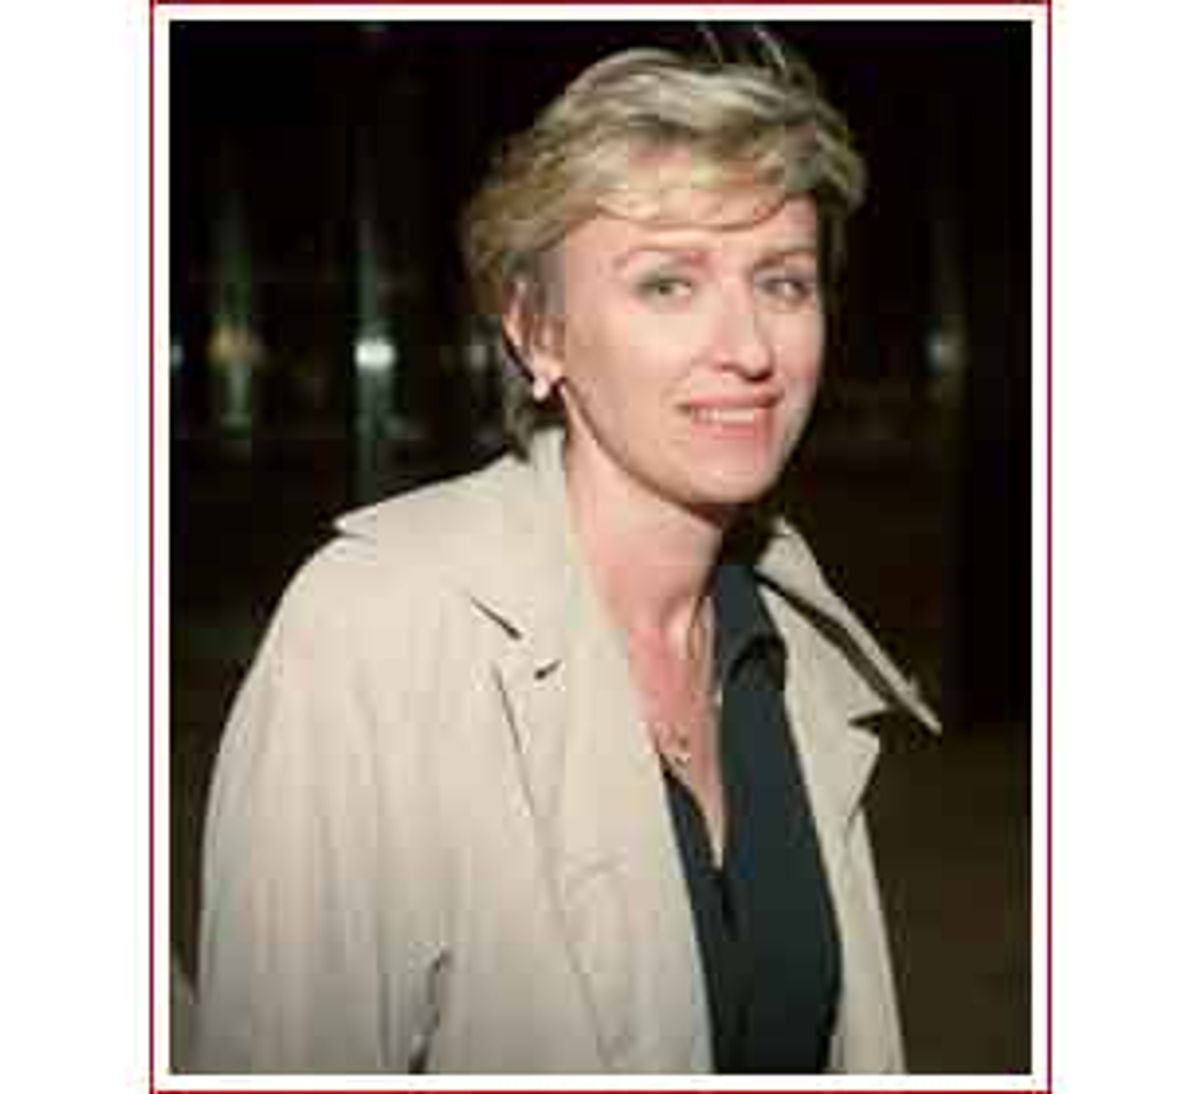 Tina Brown, Oxford-educated former Londoner and former Editor of New Yorker magazine, leaves the Four Seasons Hotel in New York Wednesday, July 8, 1998. Brown resigned her position at the New Yorker Wednesday to lead a film, TV and publishing partnership with Miramax Films. In six years as The New Yorker's editor, Brown reshaped what some considered a dusty anachronism with punchier articles, splashy photographs, and extensive coverage of politics and popular culture. (AP Photo/Leo Sorel) (Associated Press)